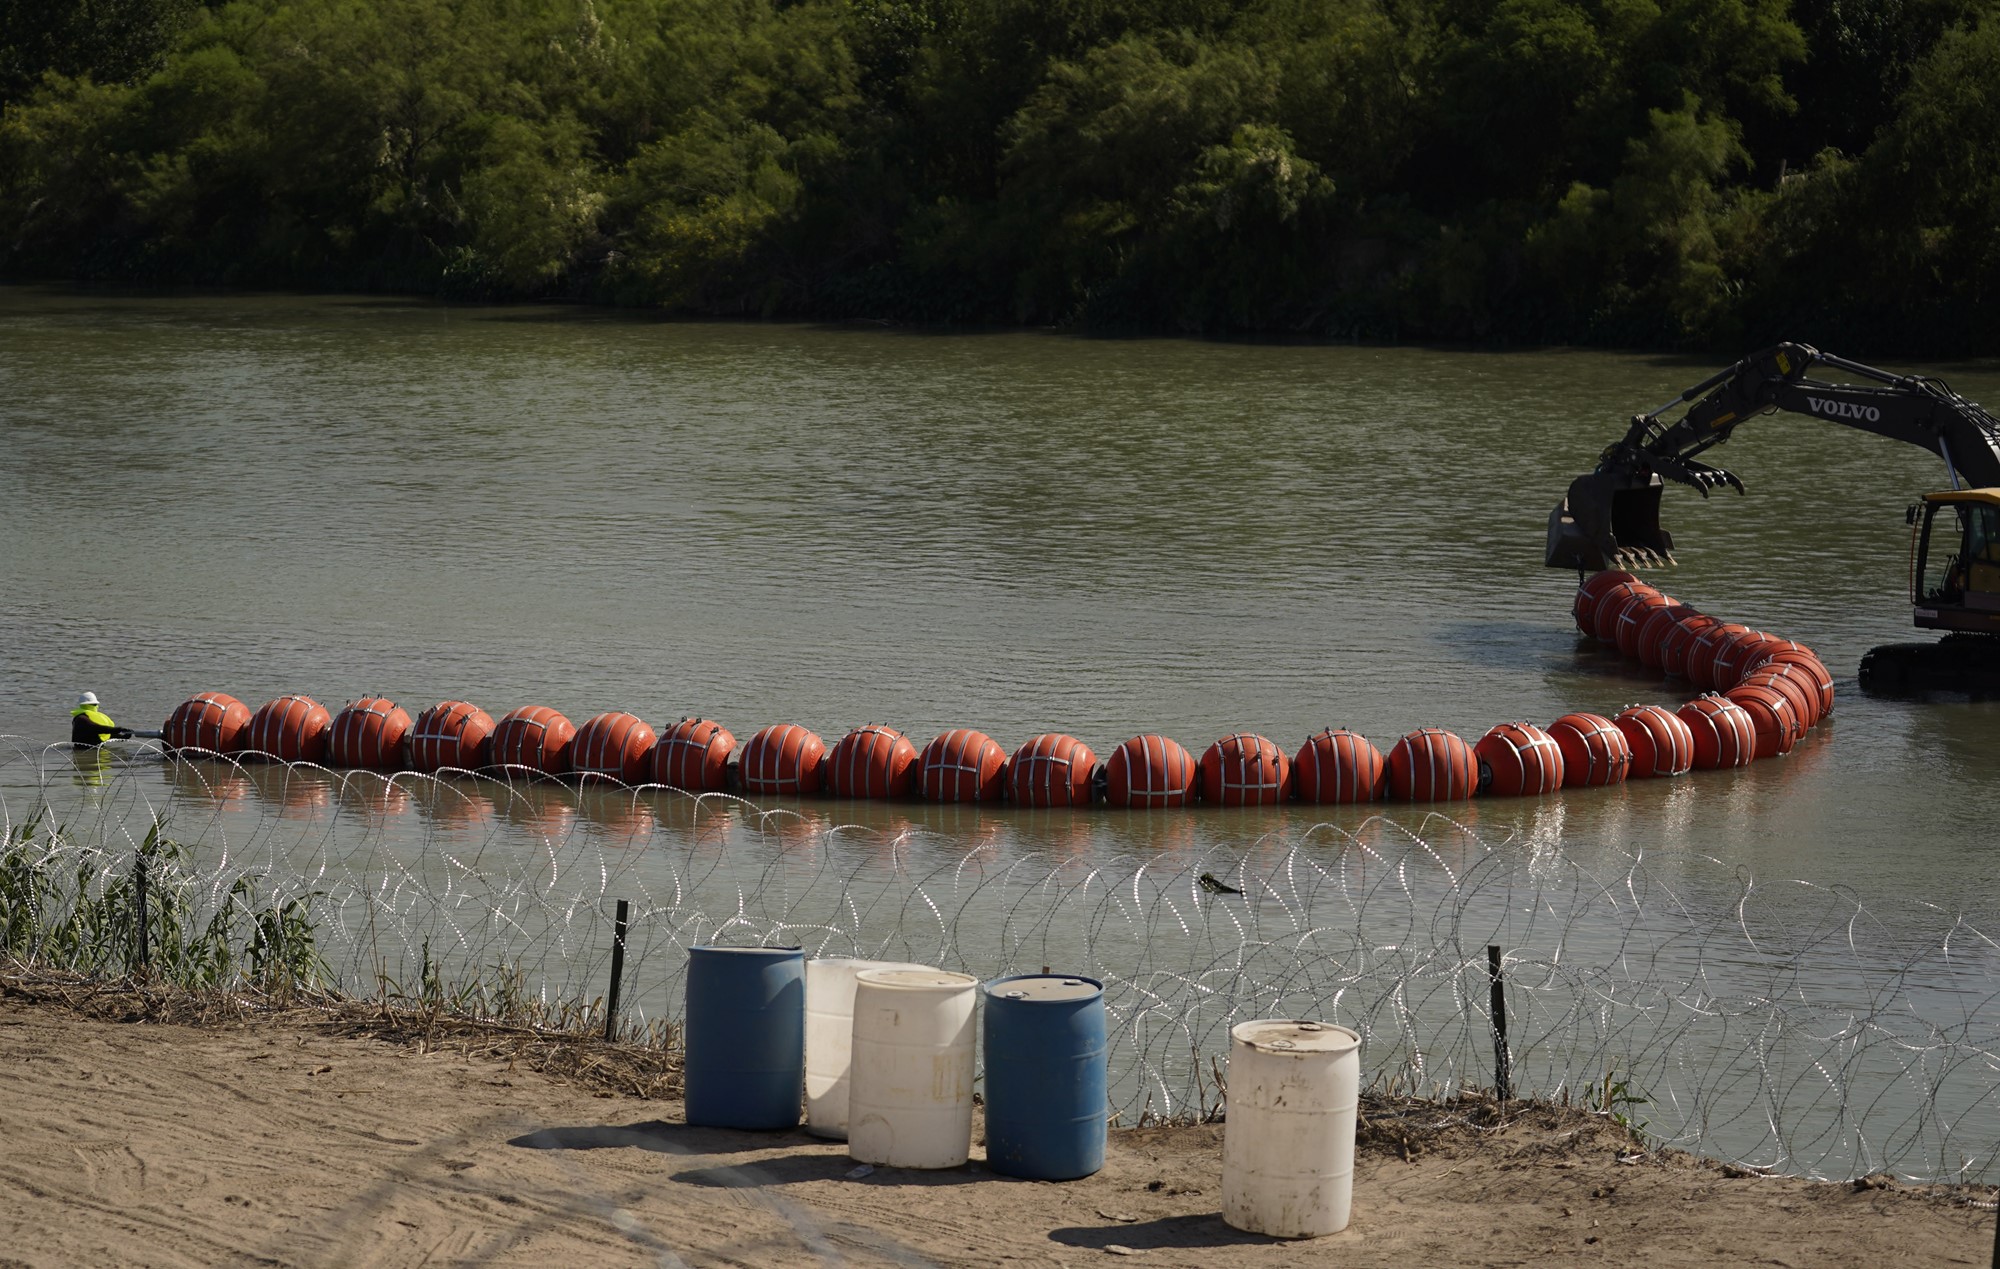 A wide shot of a connected line of plastic buoys in a body of water, being pulled by an excavator